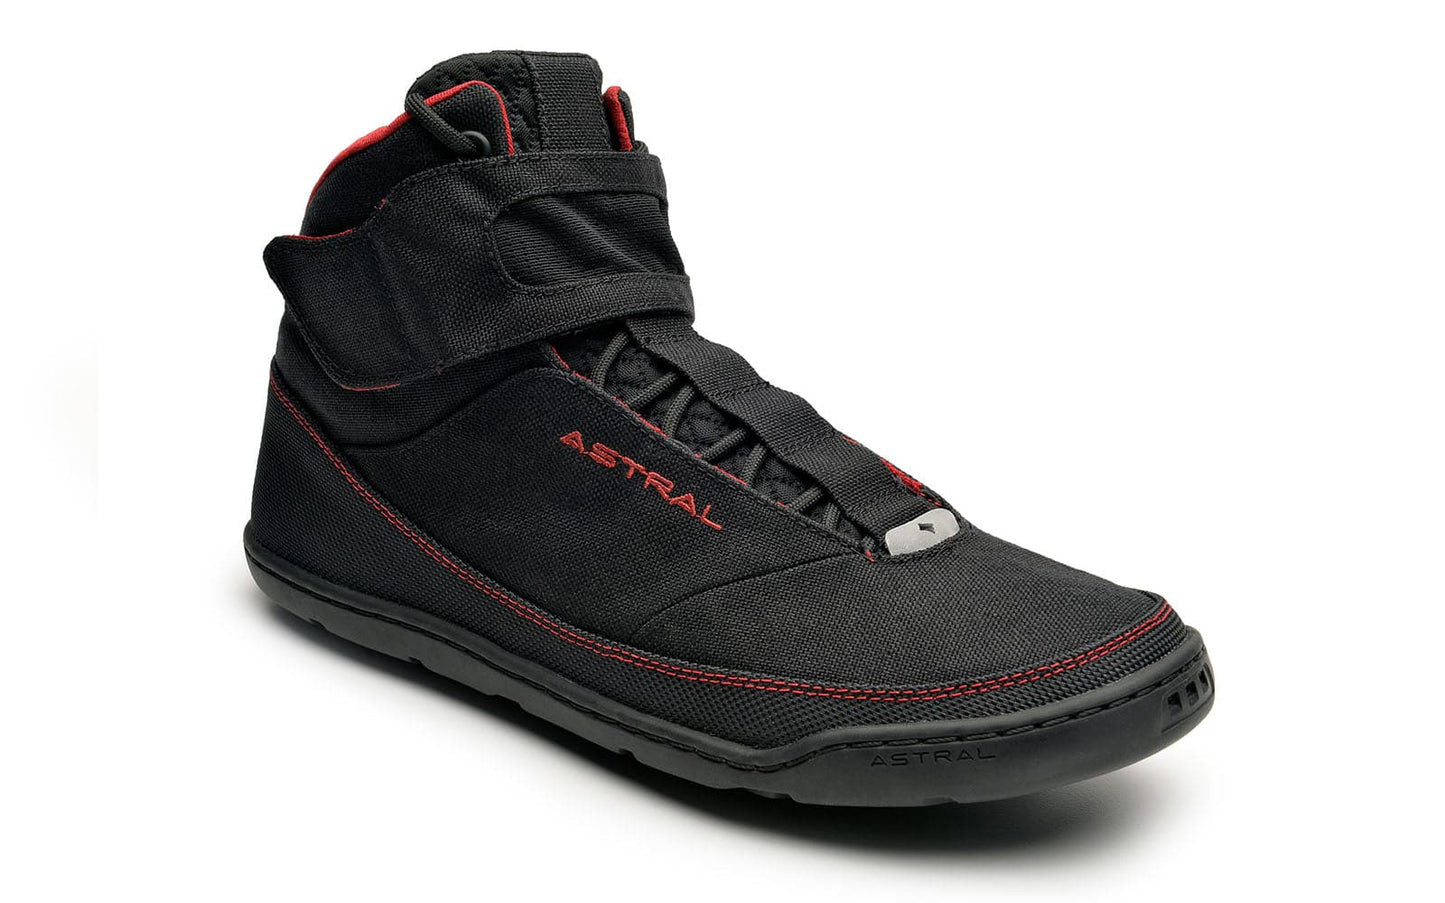 Featuring the Hiyak men's footwear, water shoe, women's footwear manufactured by Astral shown here from a second angle.